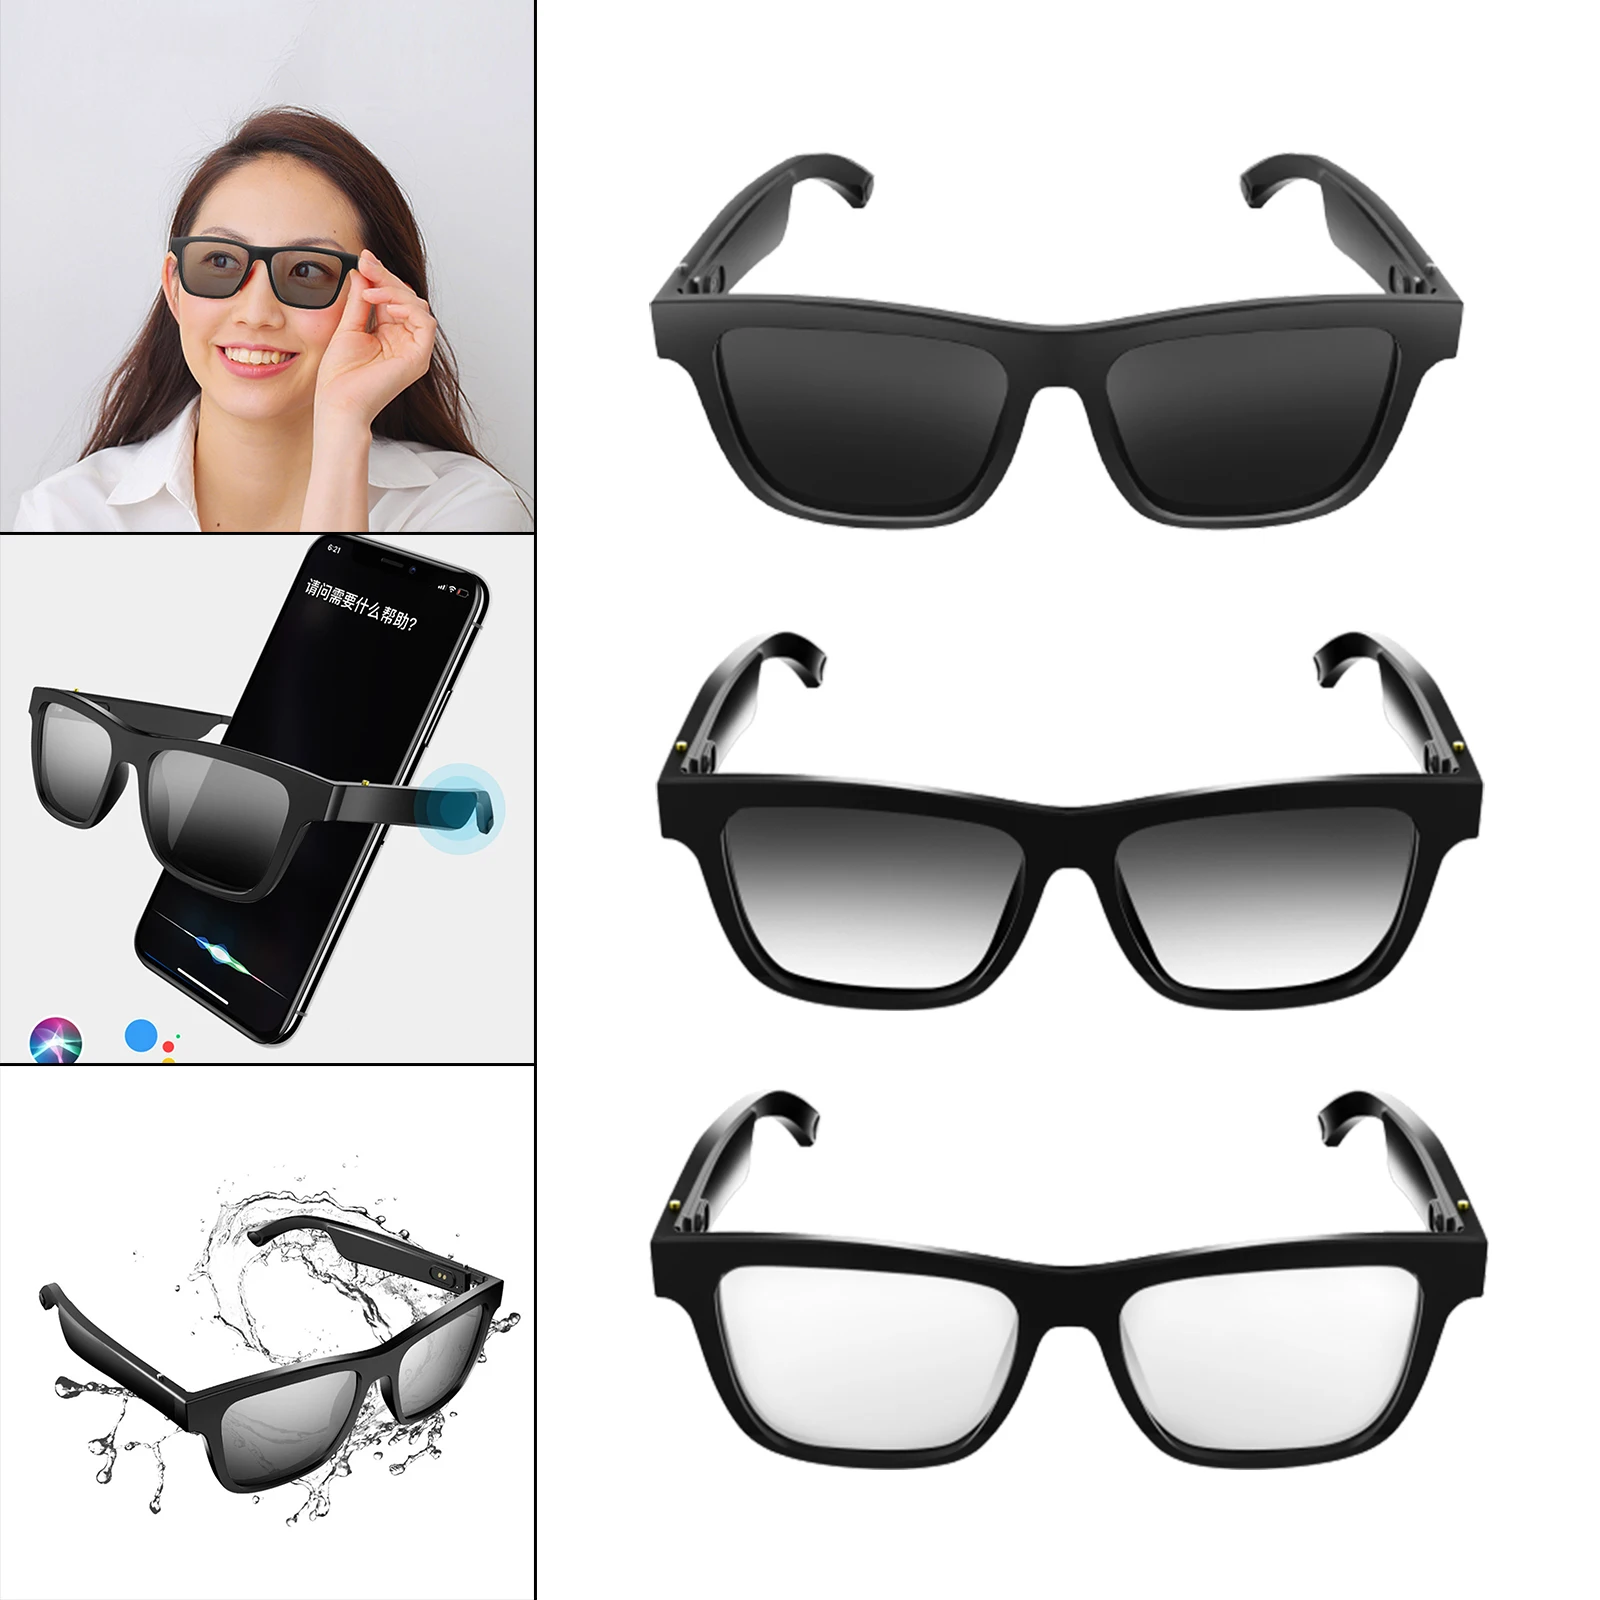 Wireless Smart Glasses with Built-in Mic Open-Ear Headphones for IOS Android for Women and Men